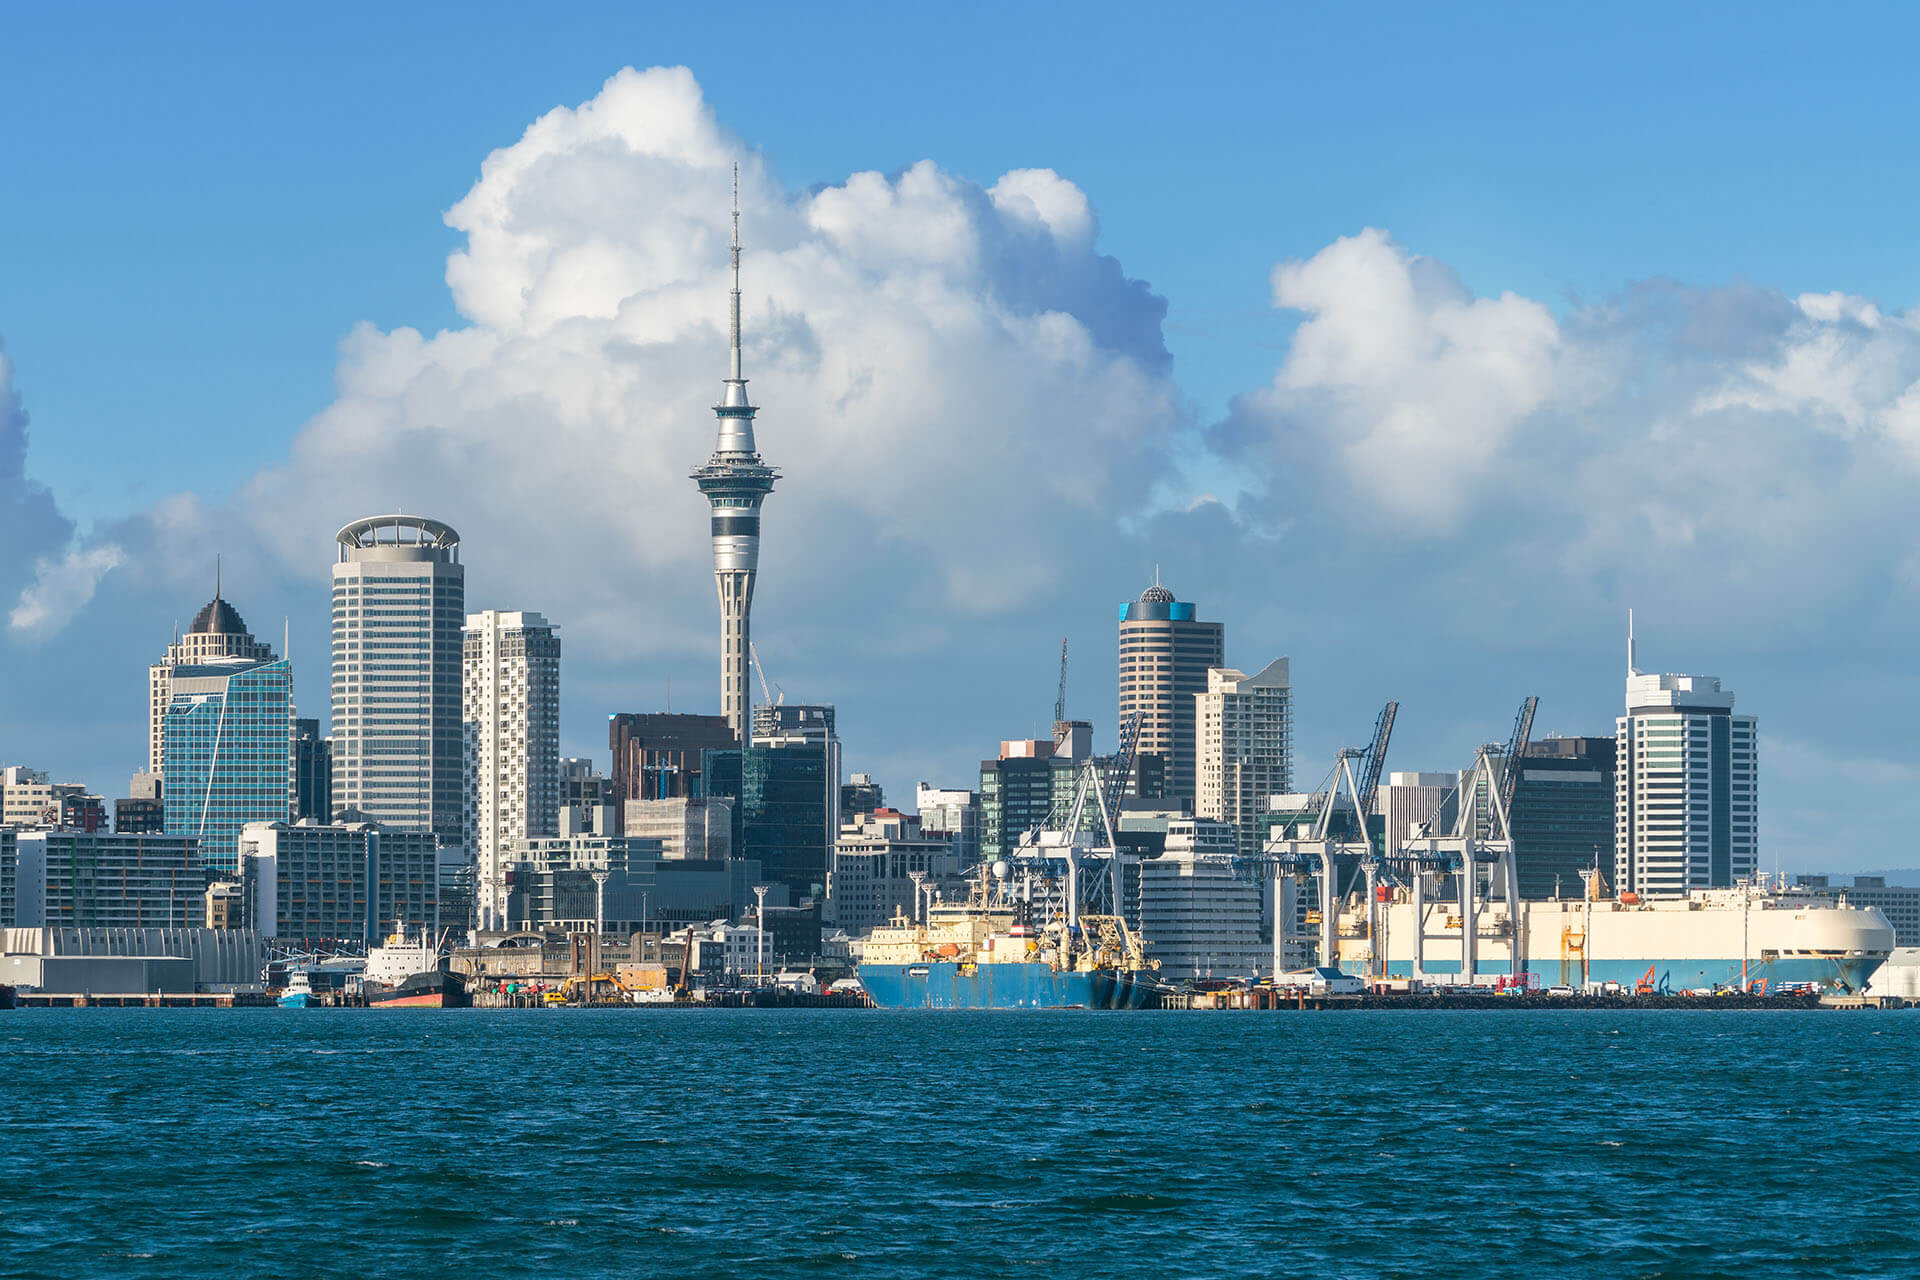 New Zealand: New Online Forms for Certain Immigration Steps